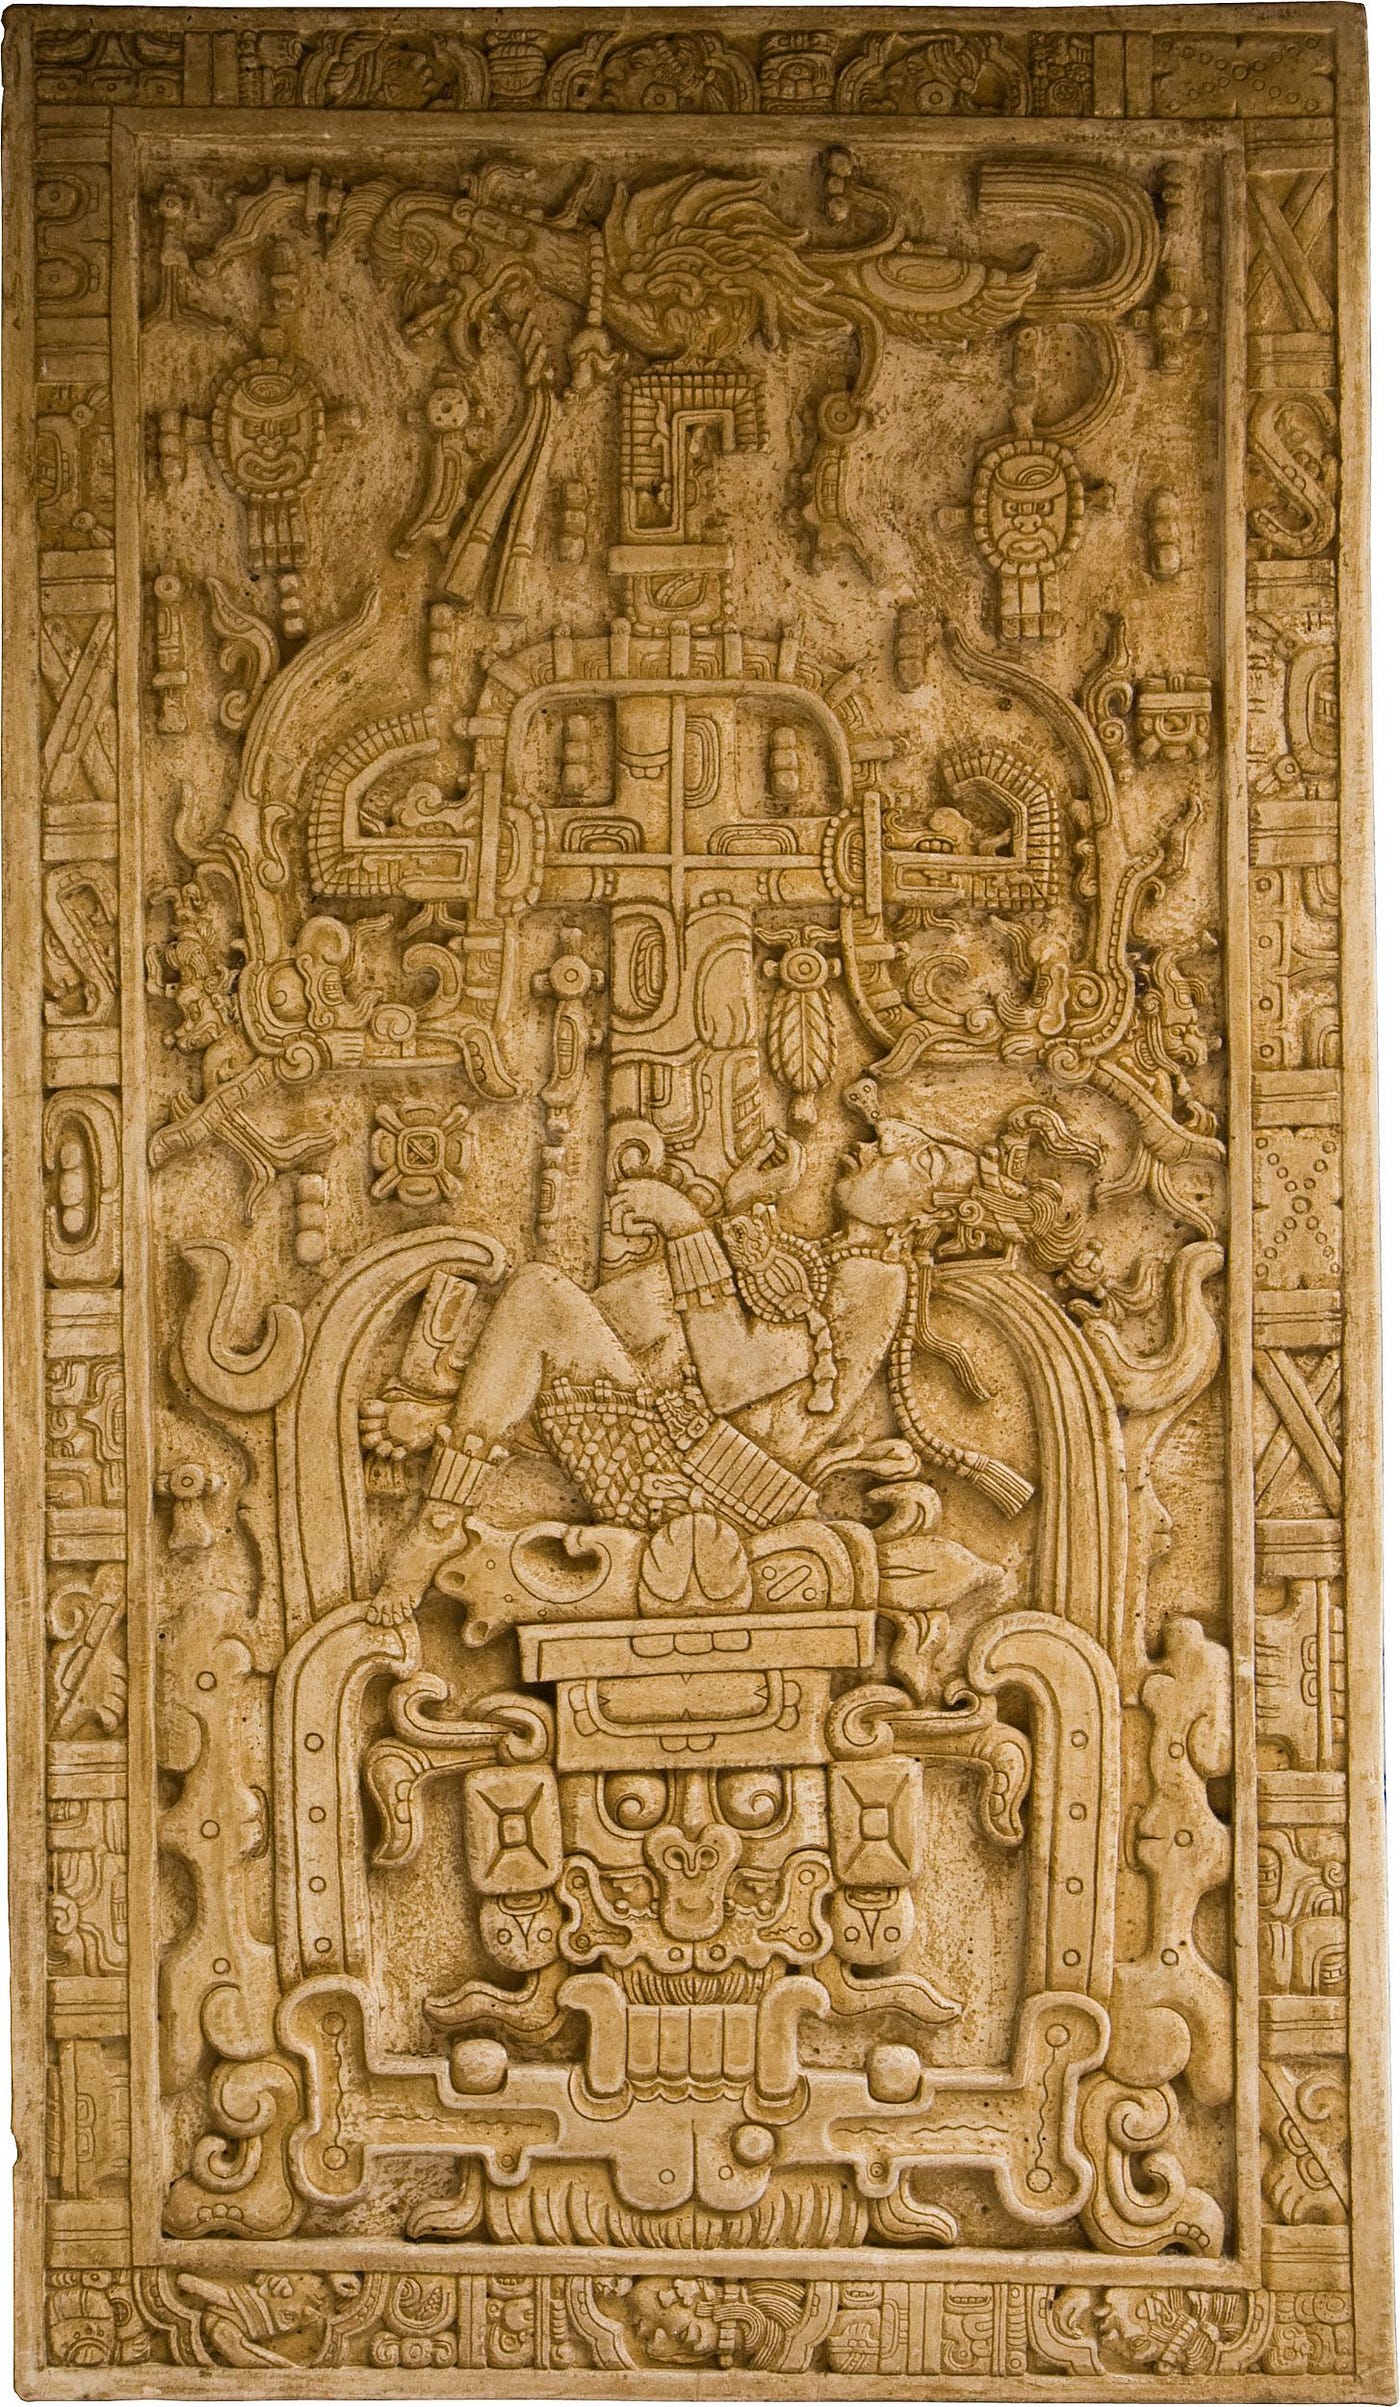 What The Blood Sacrifice Of The Maya Can Teach Us About Today